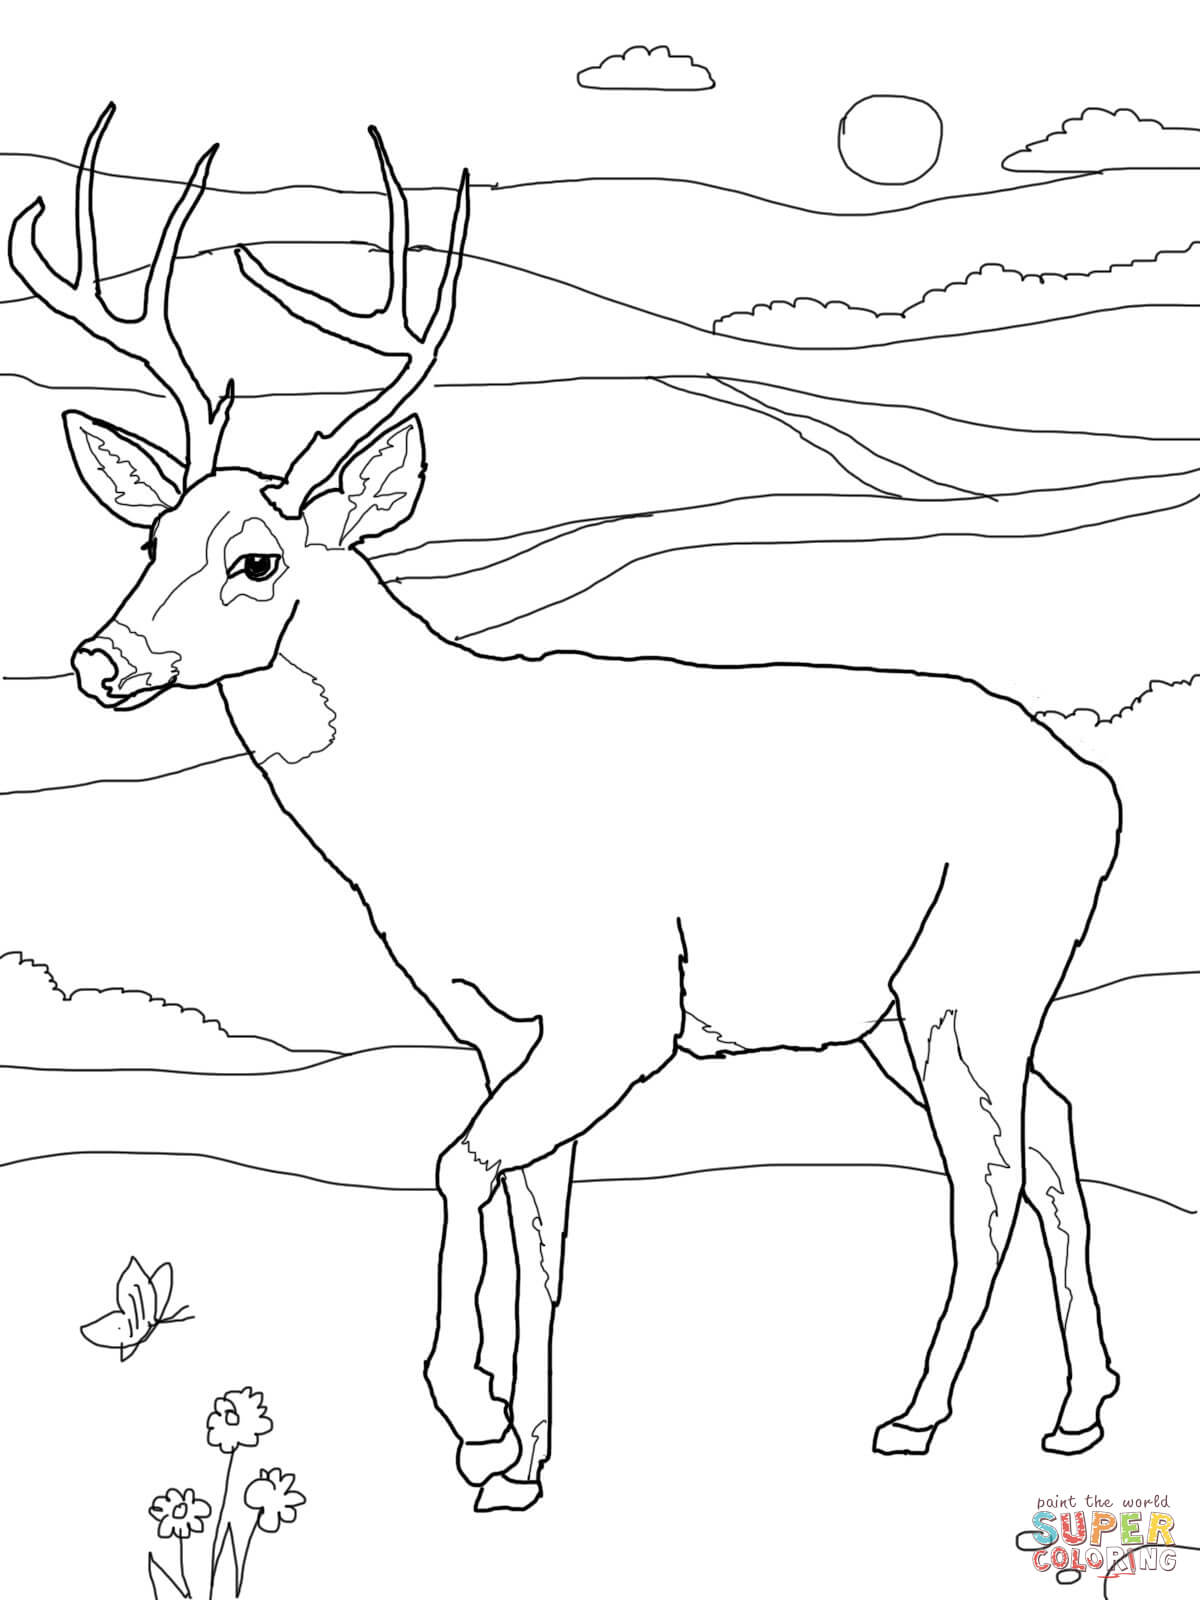 White-tailed Deer coloring #3, Download drawings